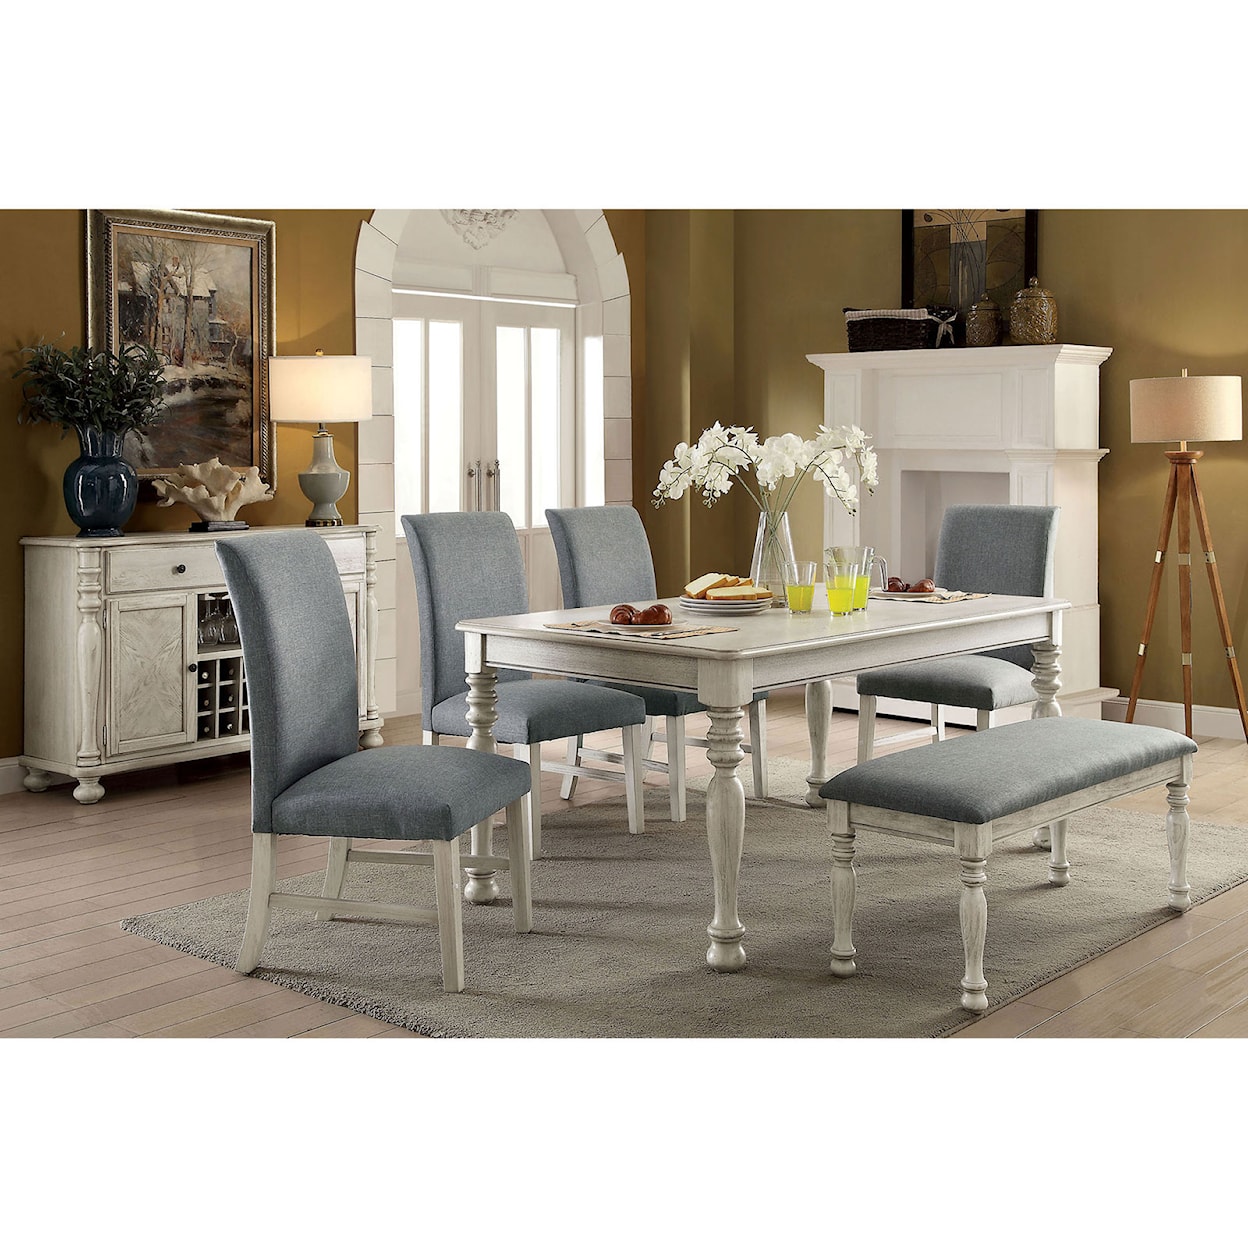 Furniture of America Kathryn Upholstered Benches